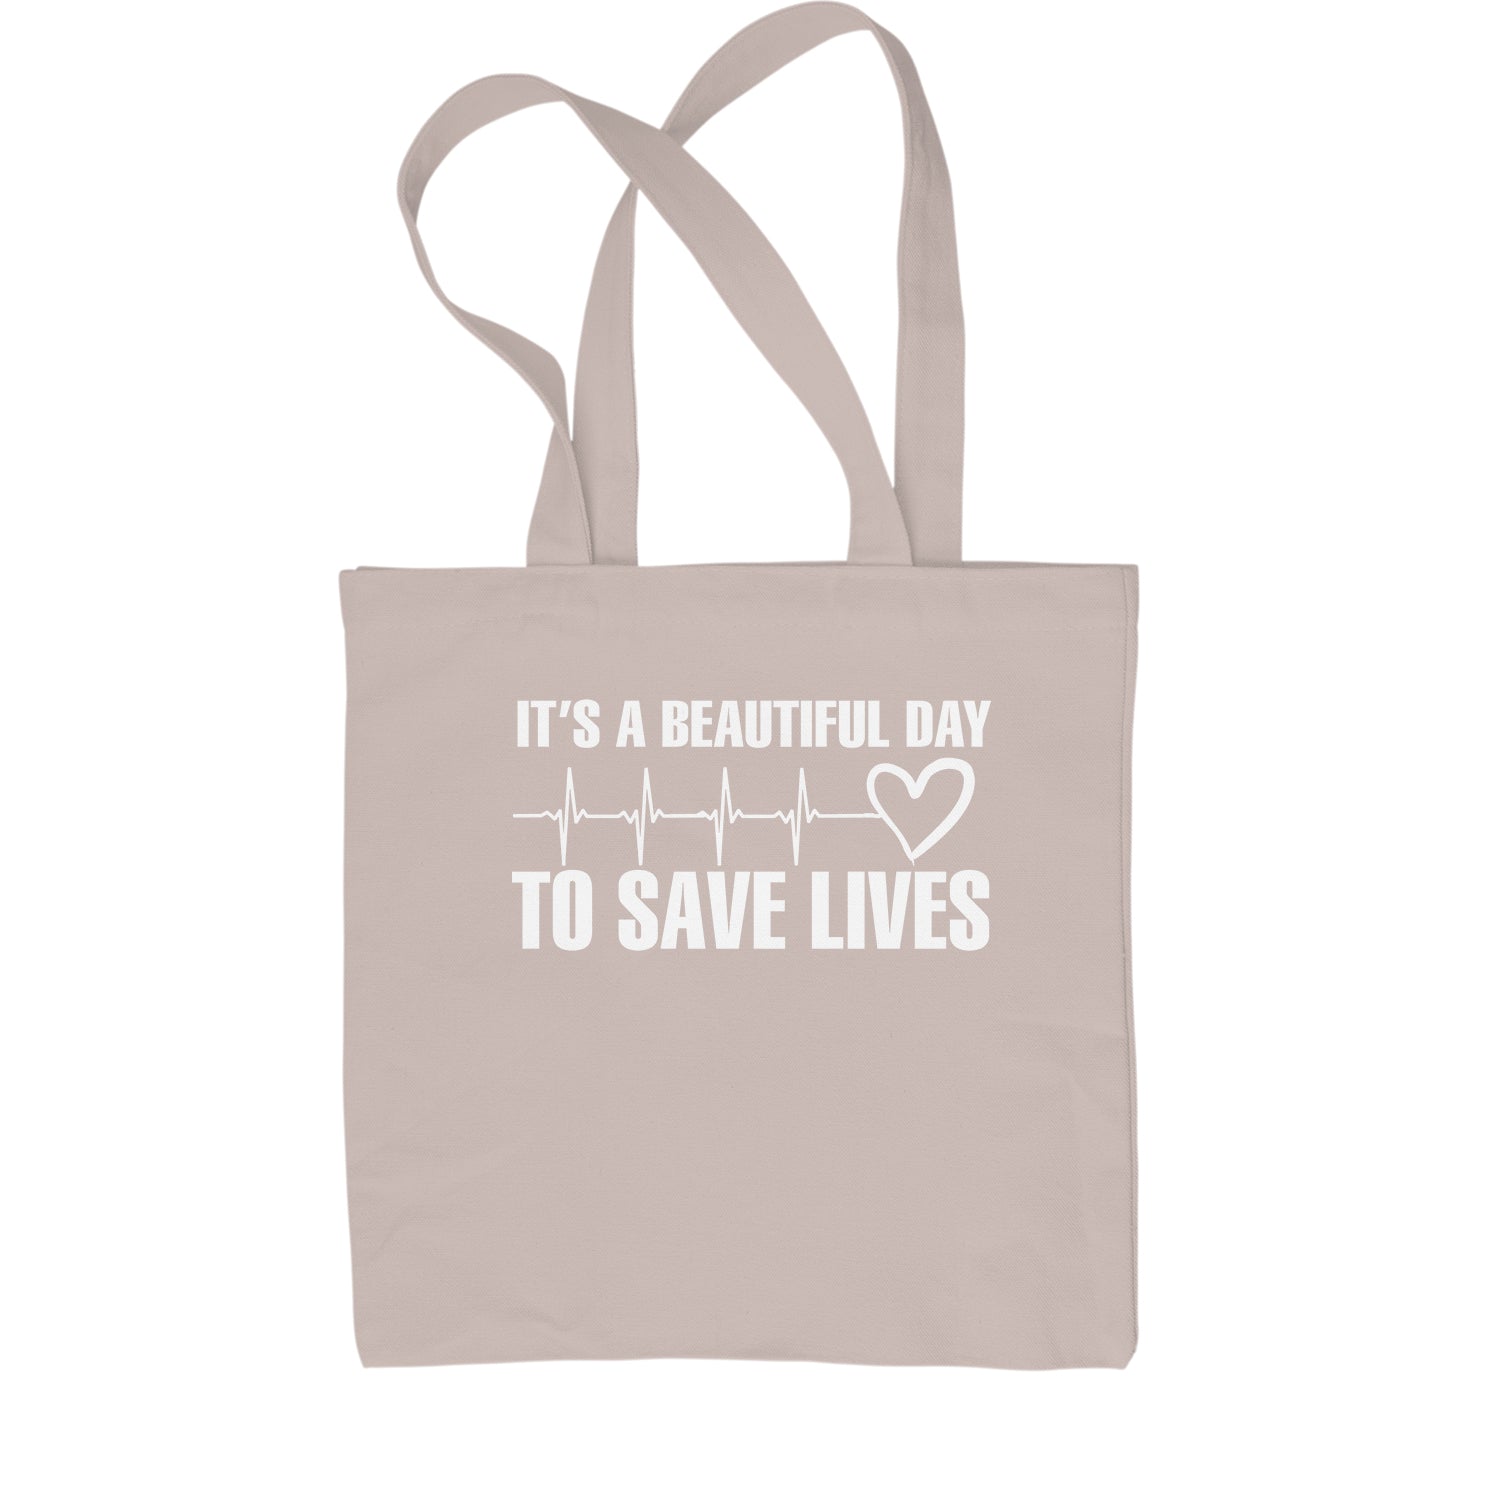 It's A Beautiful Day To Save Lives (White Print) Shopping Tote Bag #expressiontees by Expression Tees